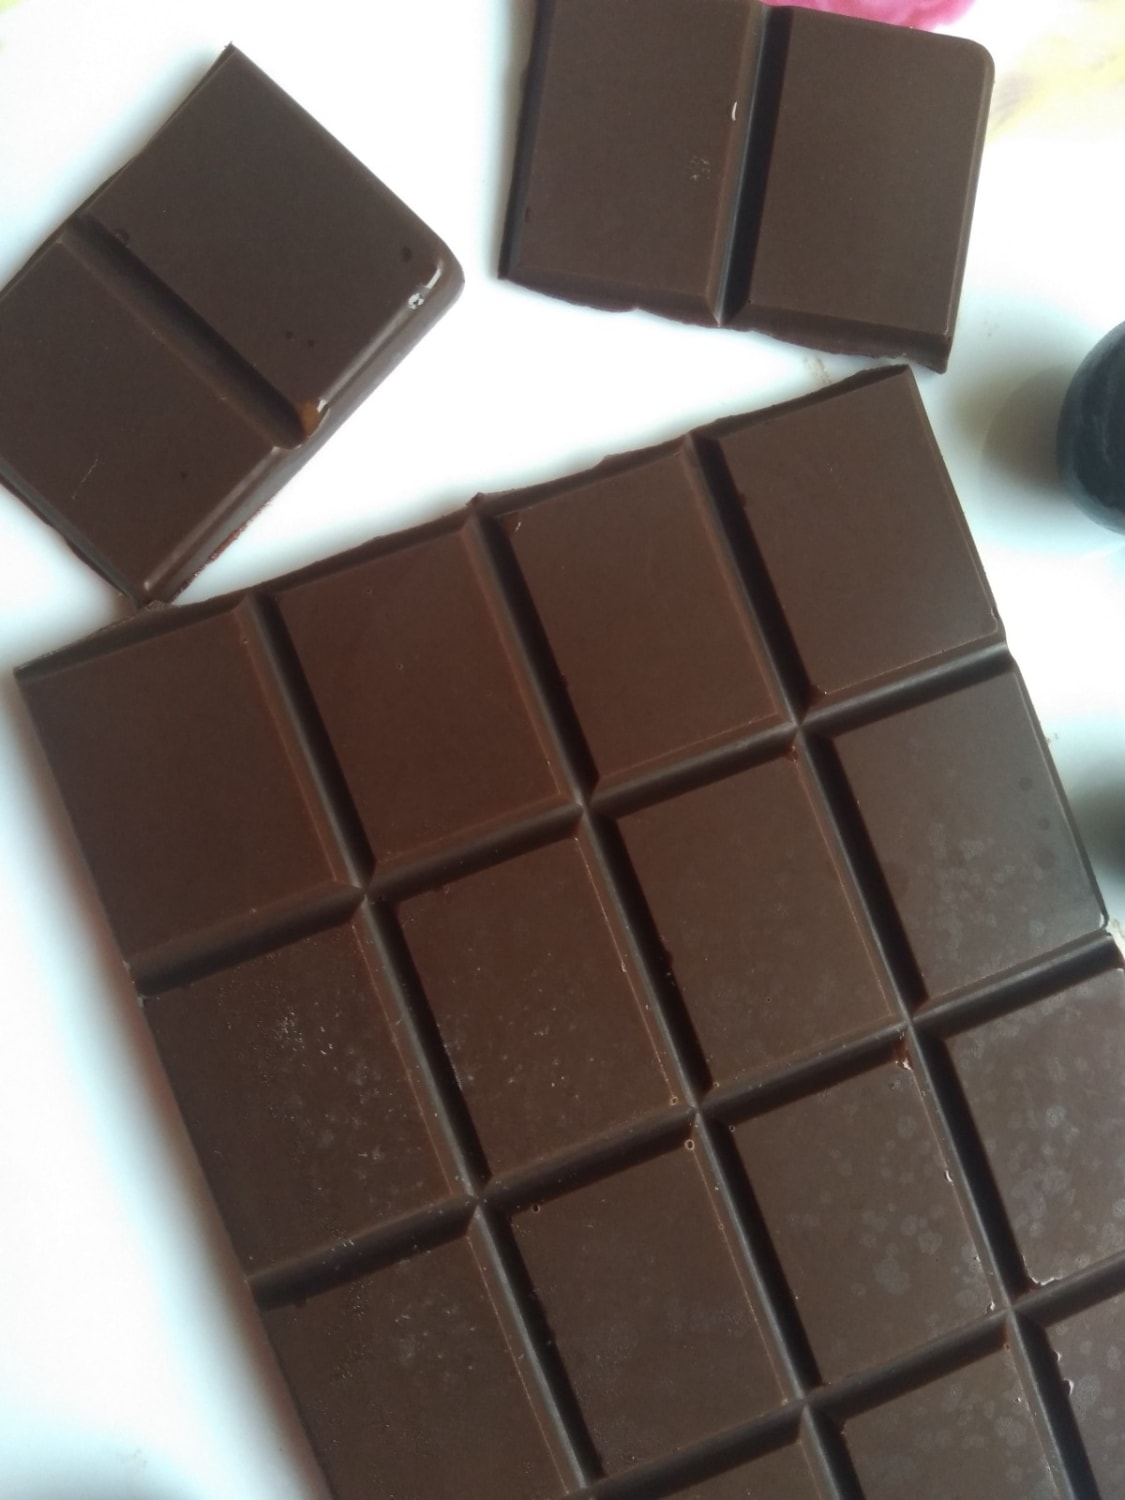 Chocolate with just two ingredients